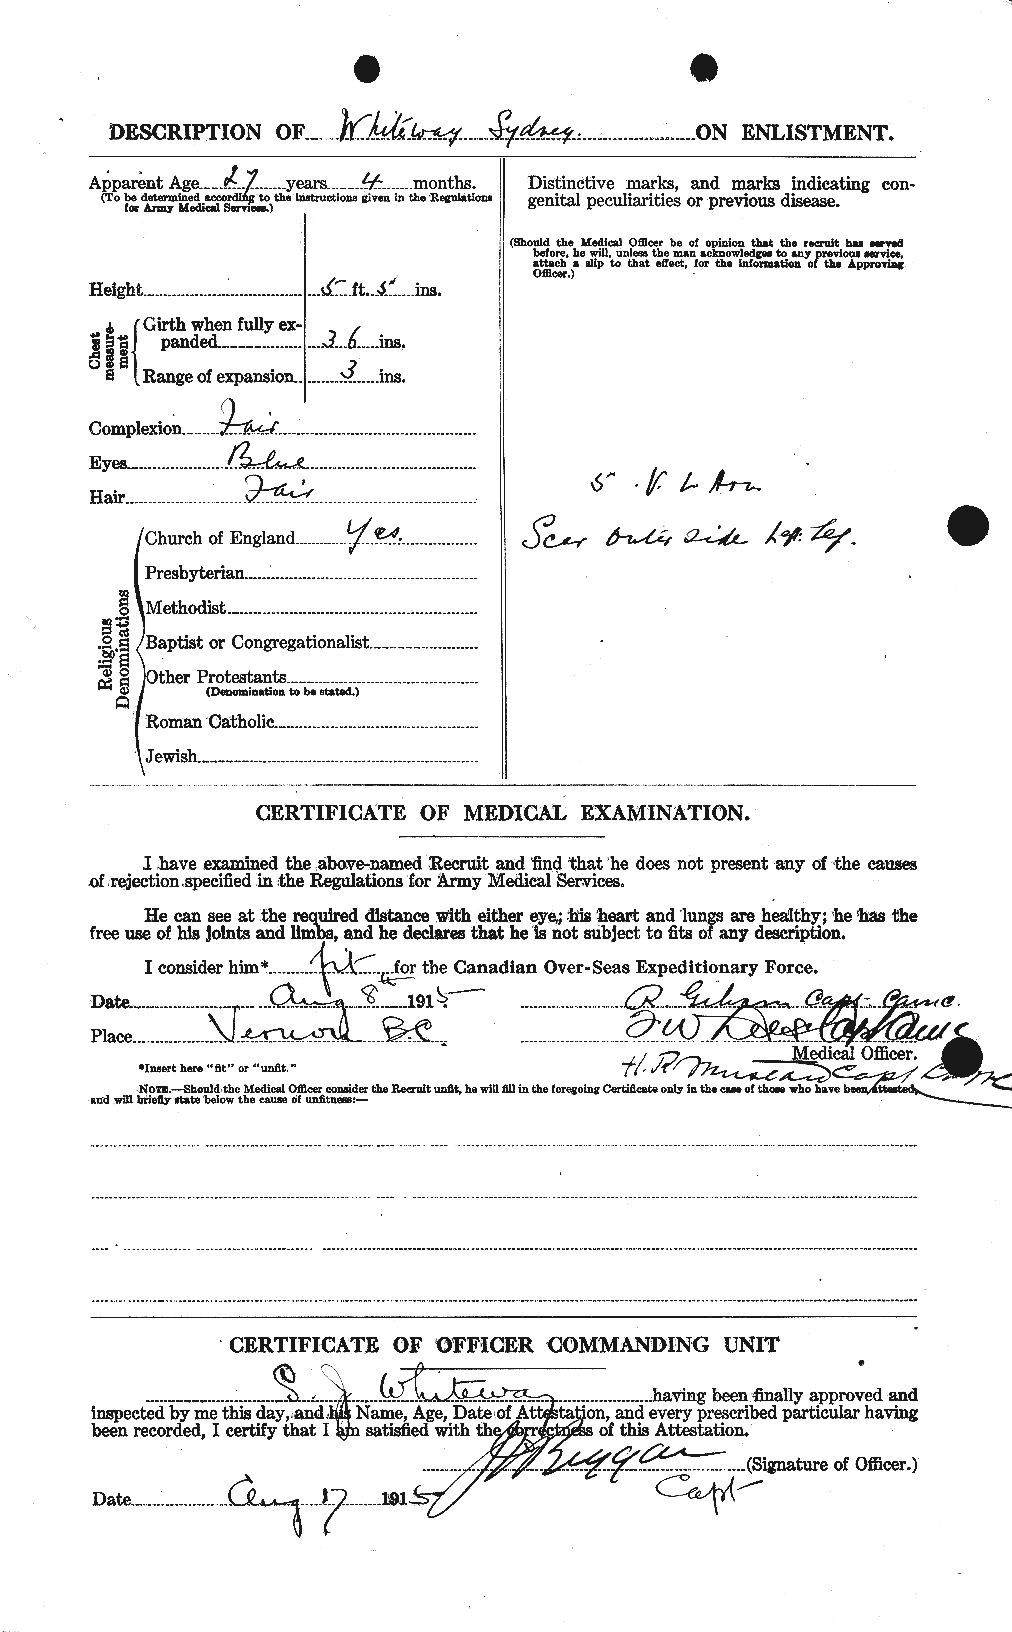 Personnel Records of the First World War - CEF 670665b